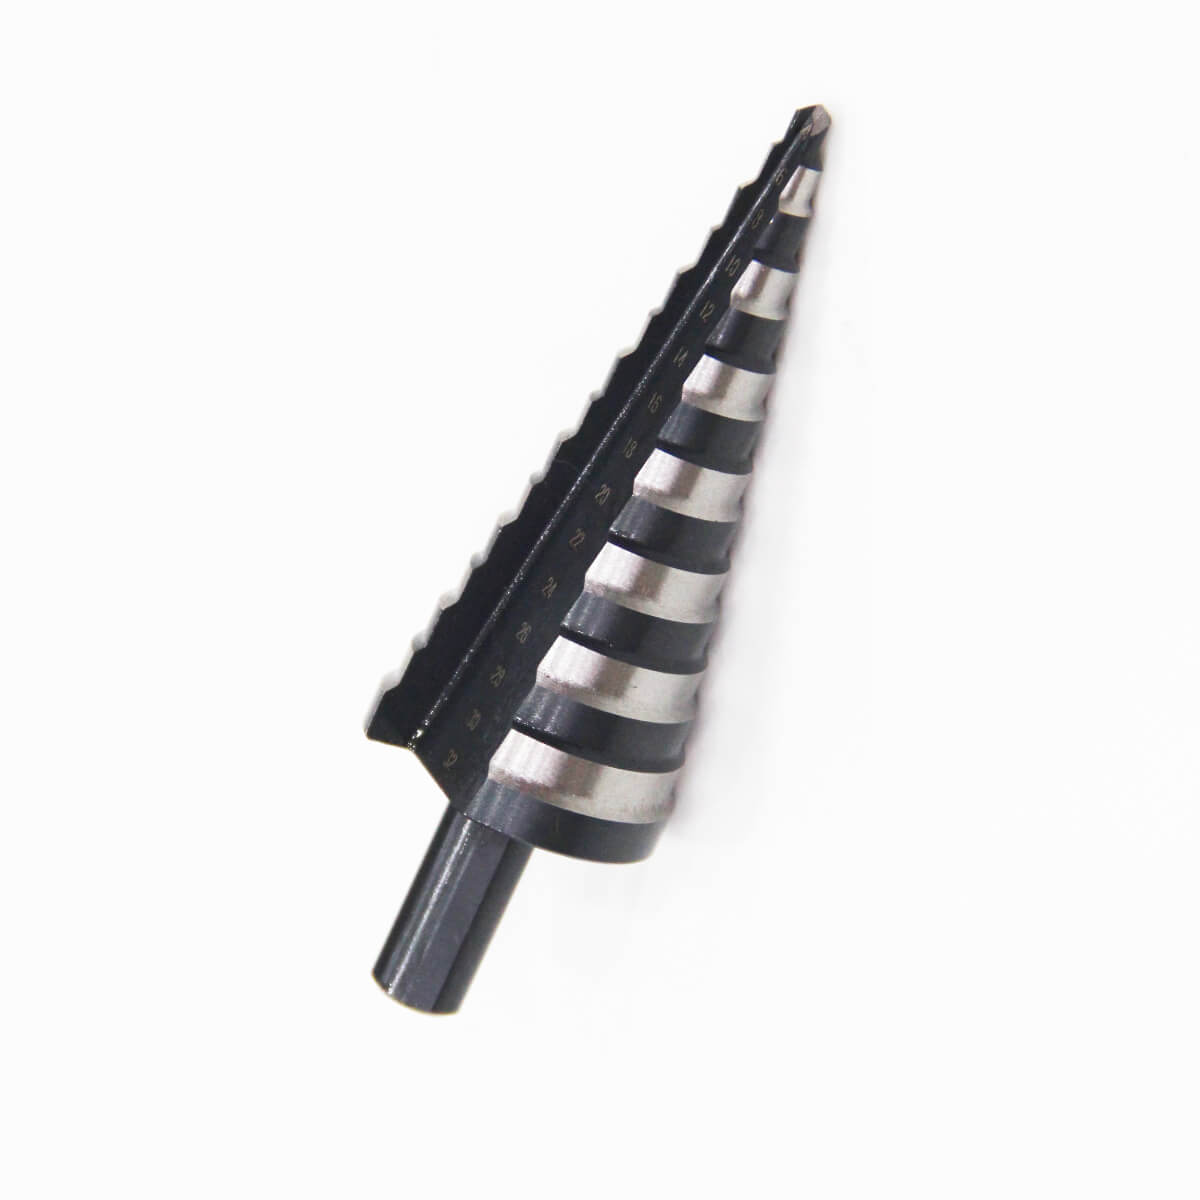 HSS Step Drill Bit Blcak and White Finish With Tri-Flats Shank